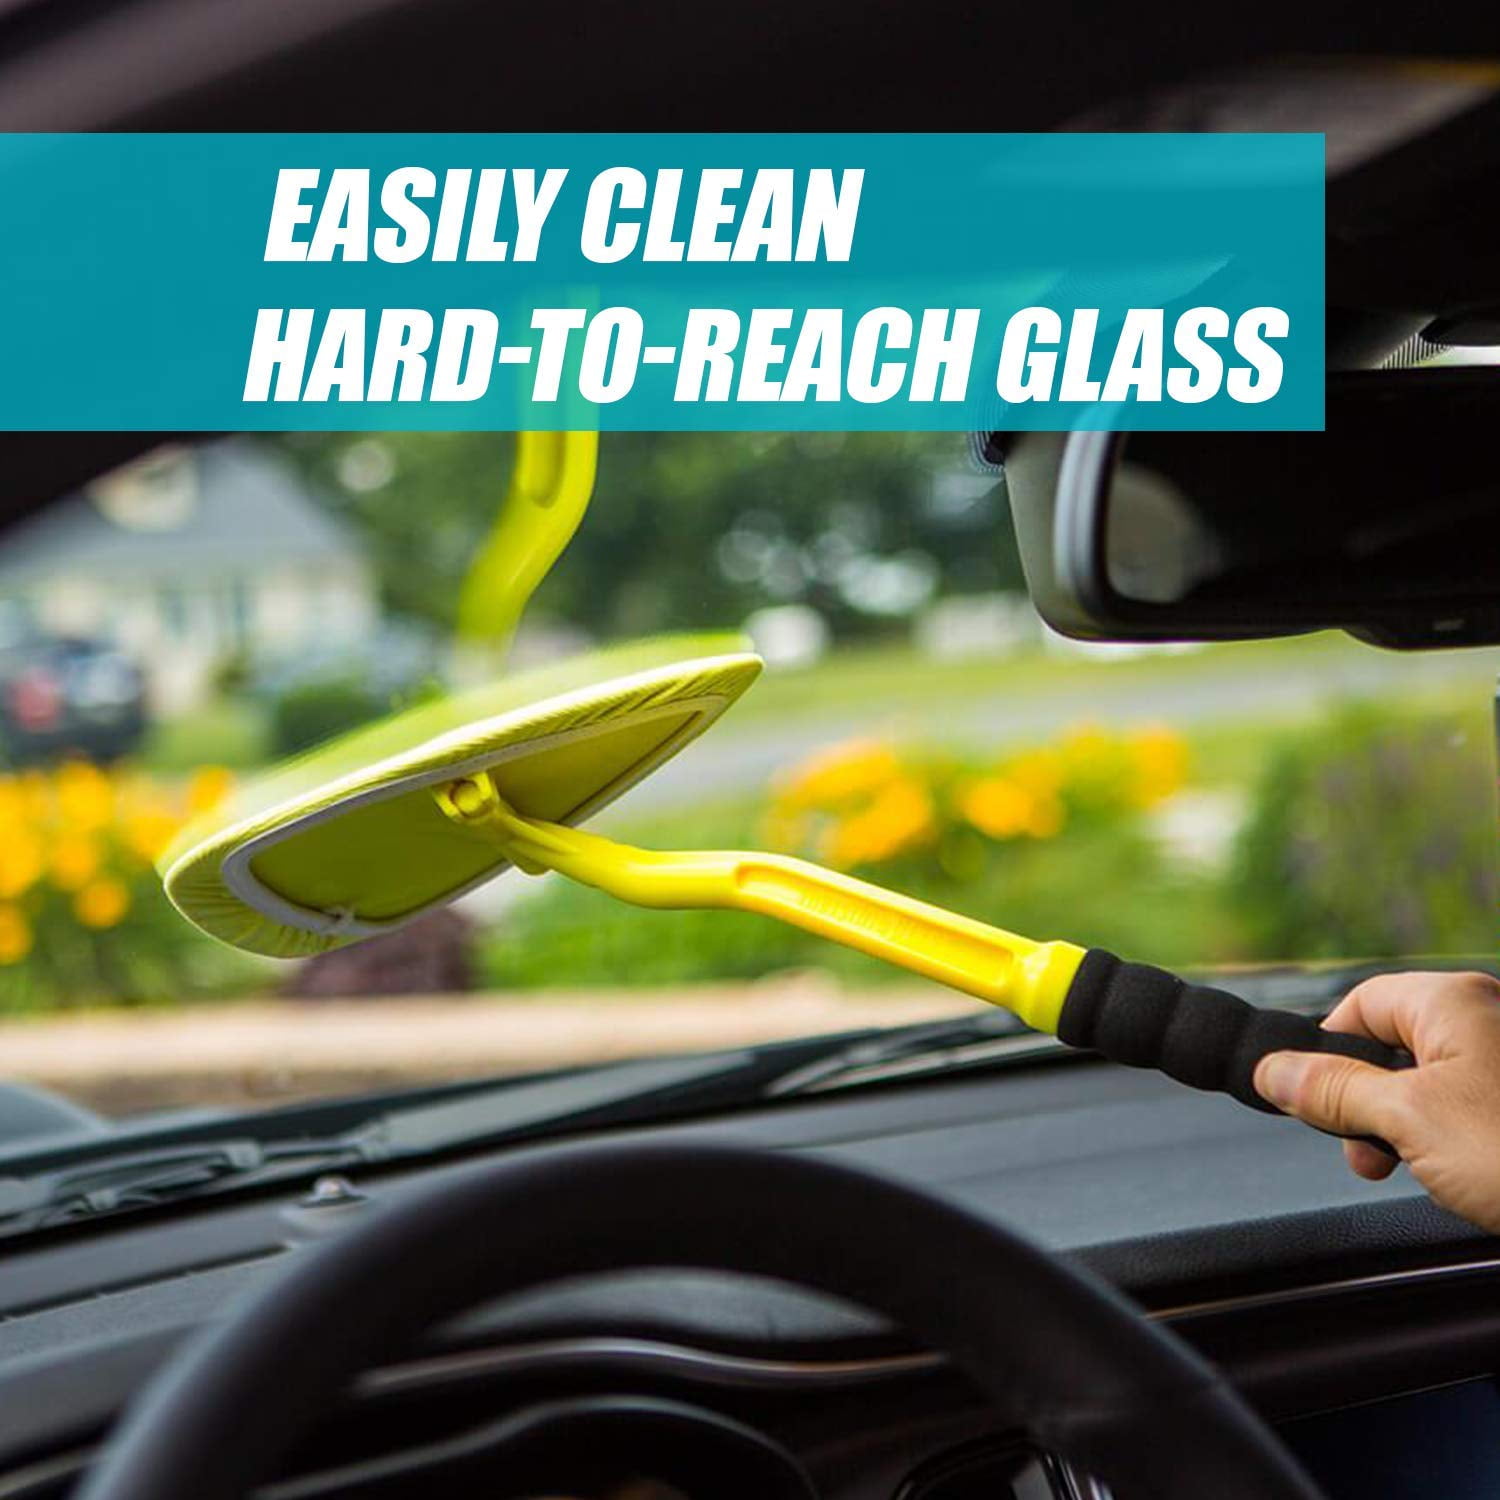 Unique Car Pivoting Triangular Head Window Glass Cleaner with Long-Reach Handle Car & Home Inside Interior Exterior Use AD AIDO Windshield Cleaner 1 Reusable Microfiber Pads 